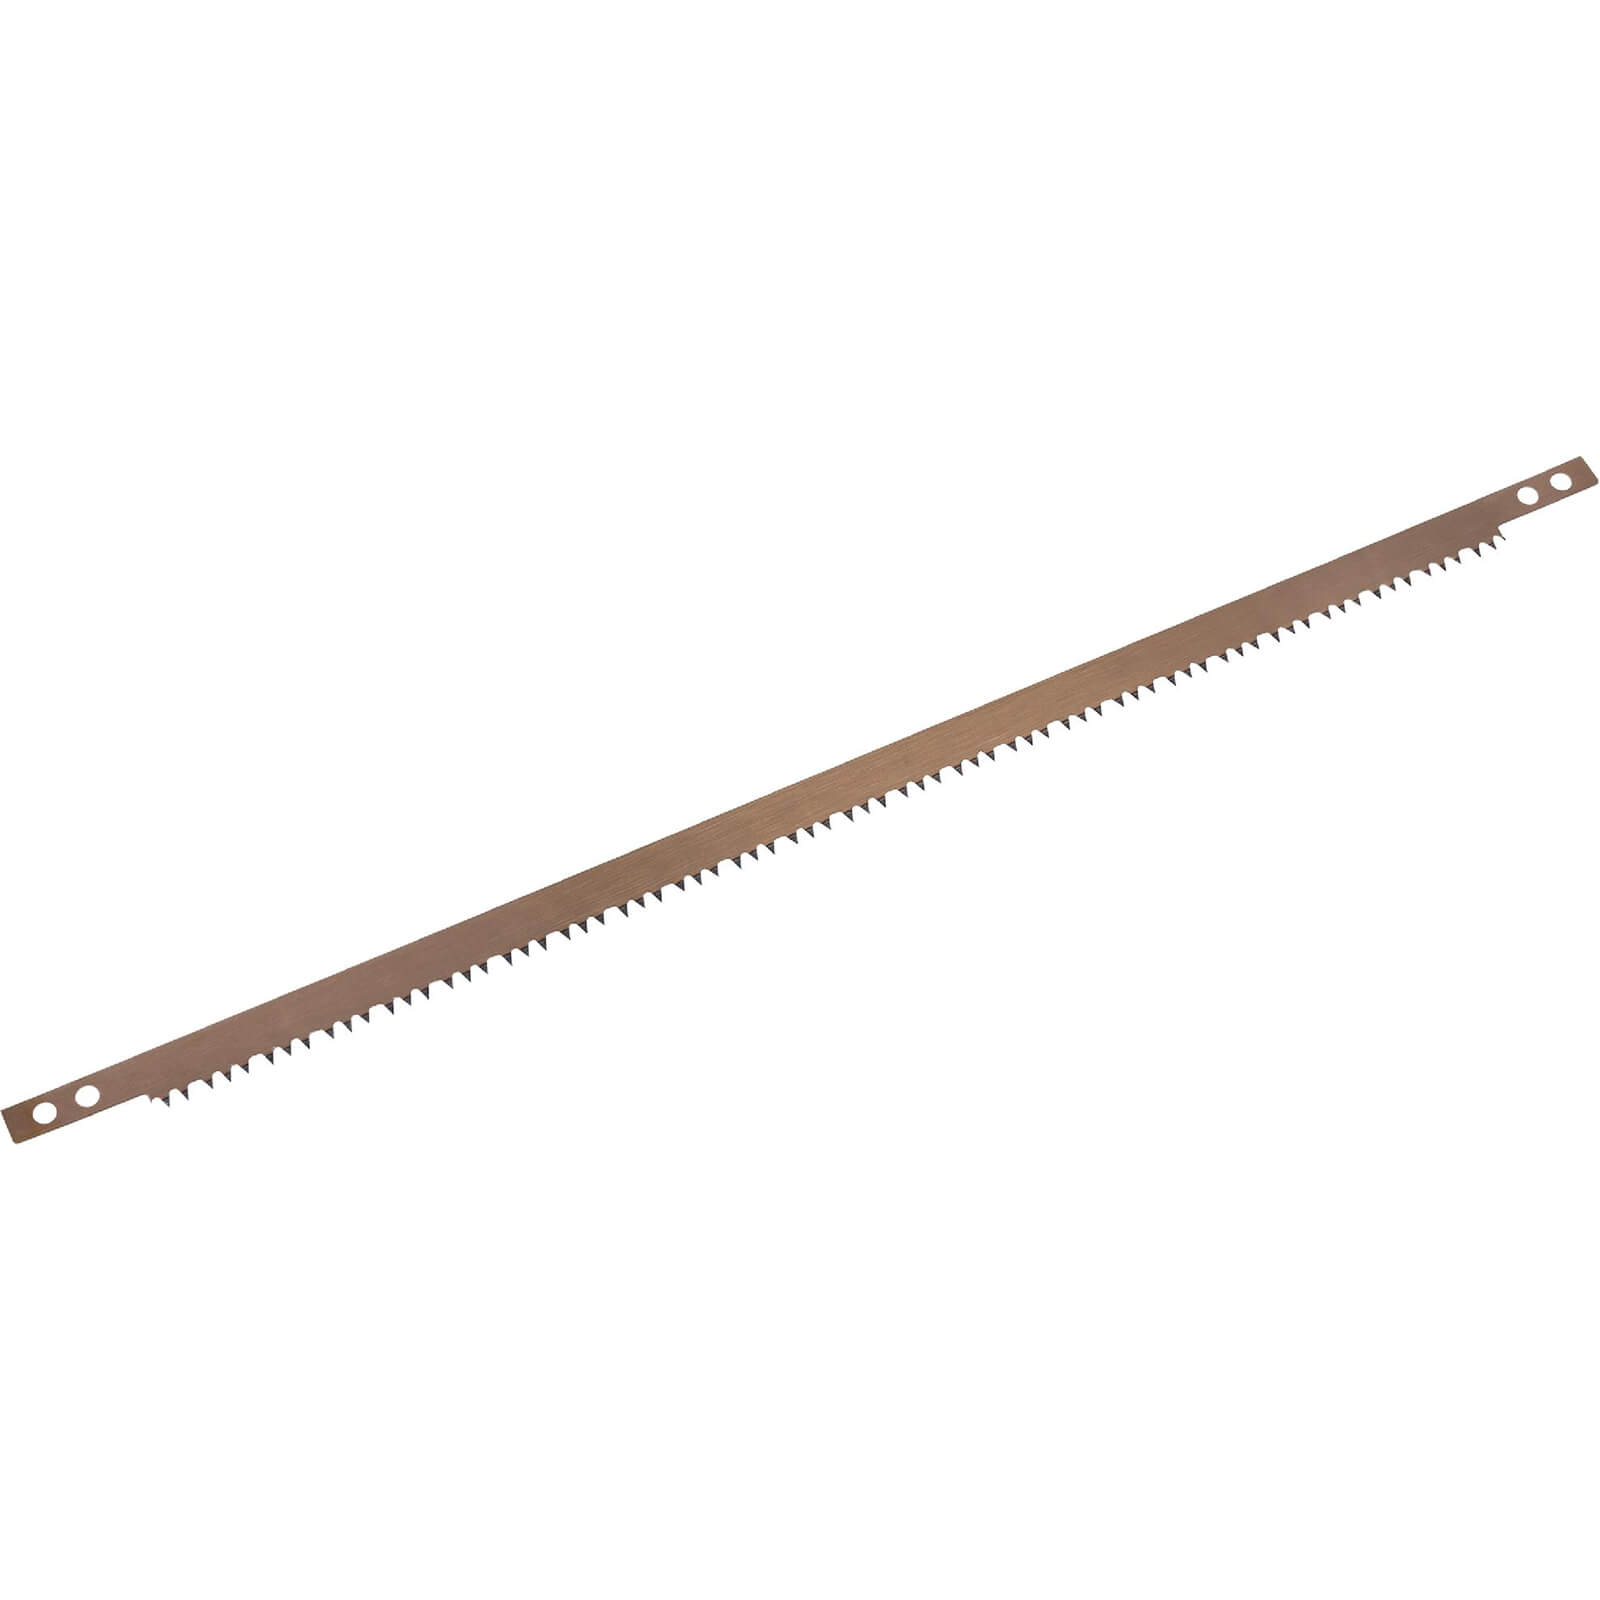 Image of Roughneck Bow Saw Blade with Small Teeth 21" / 525mm